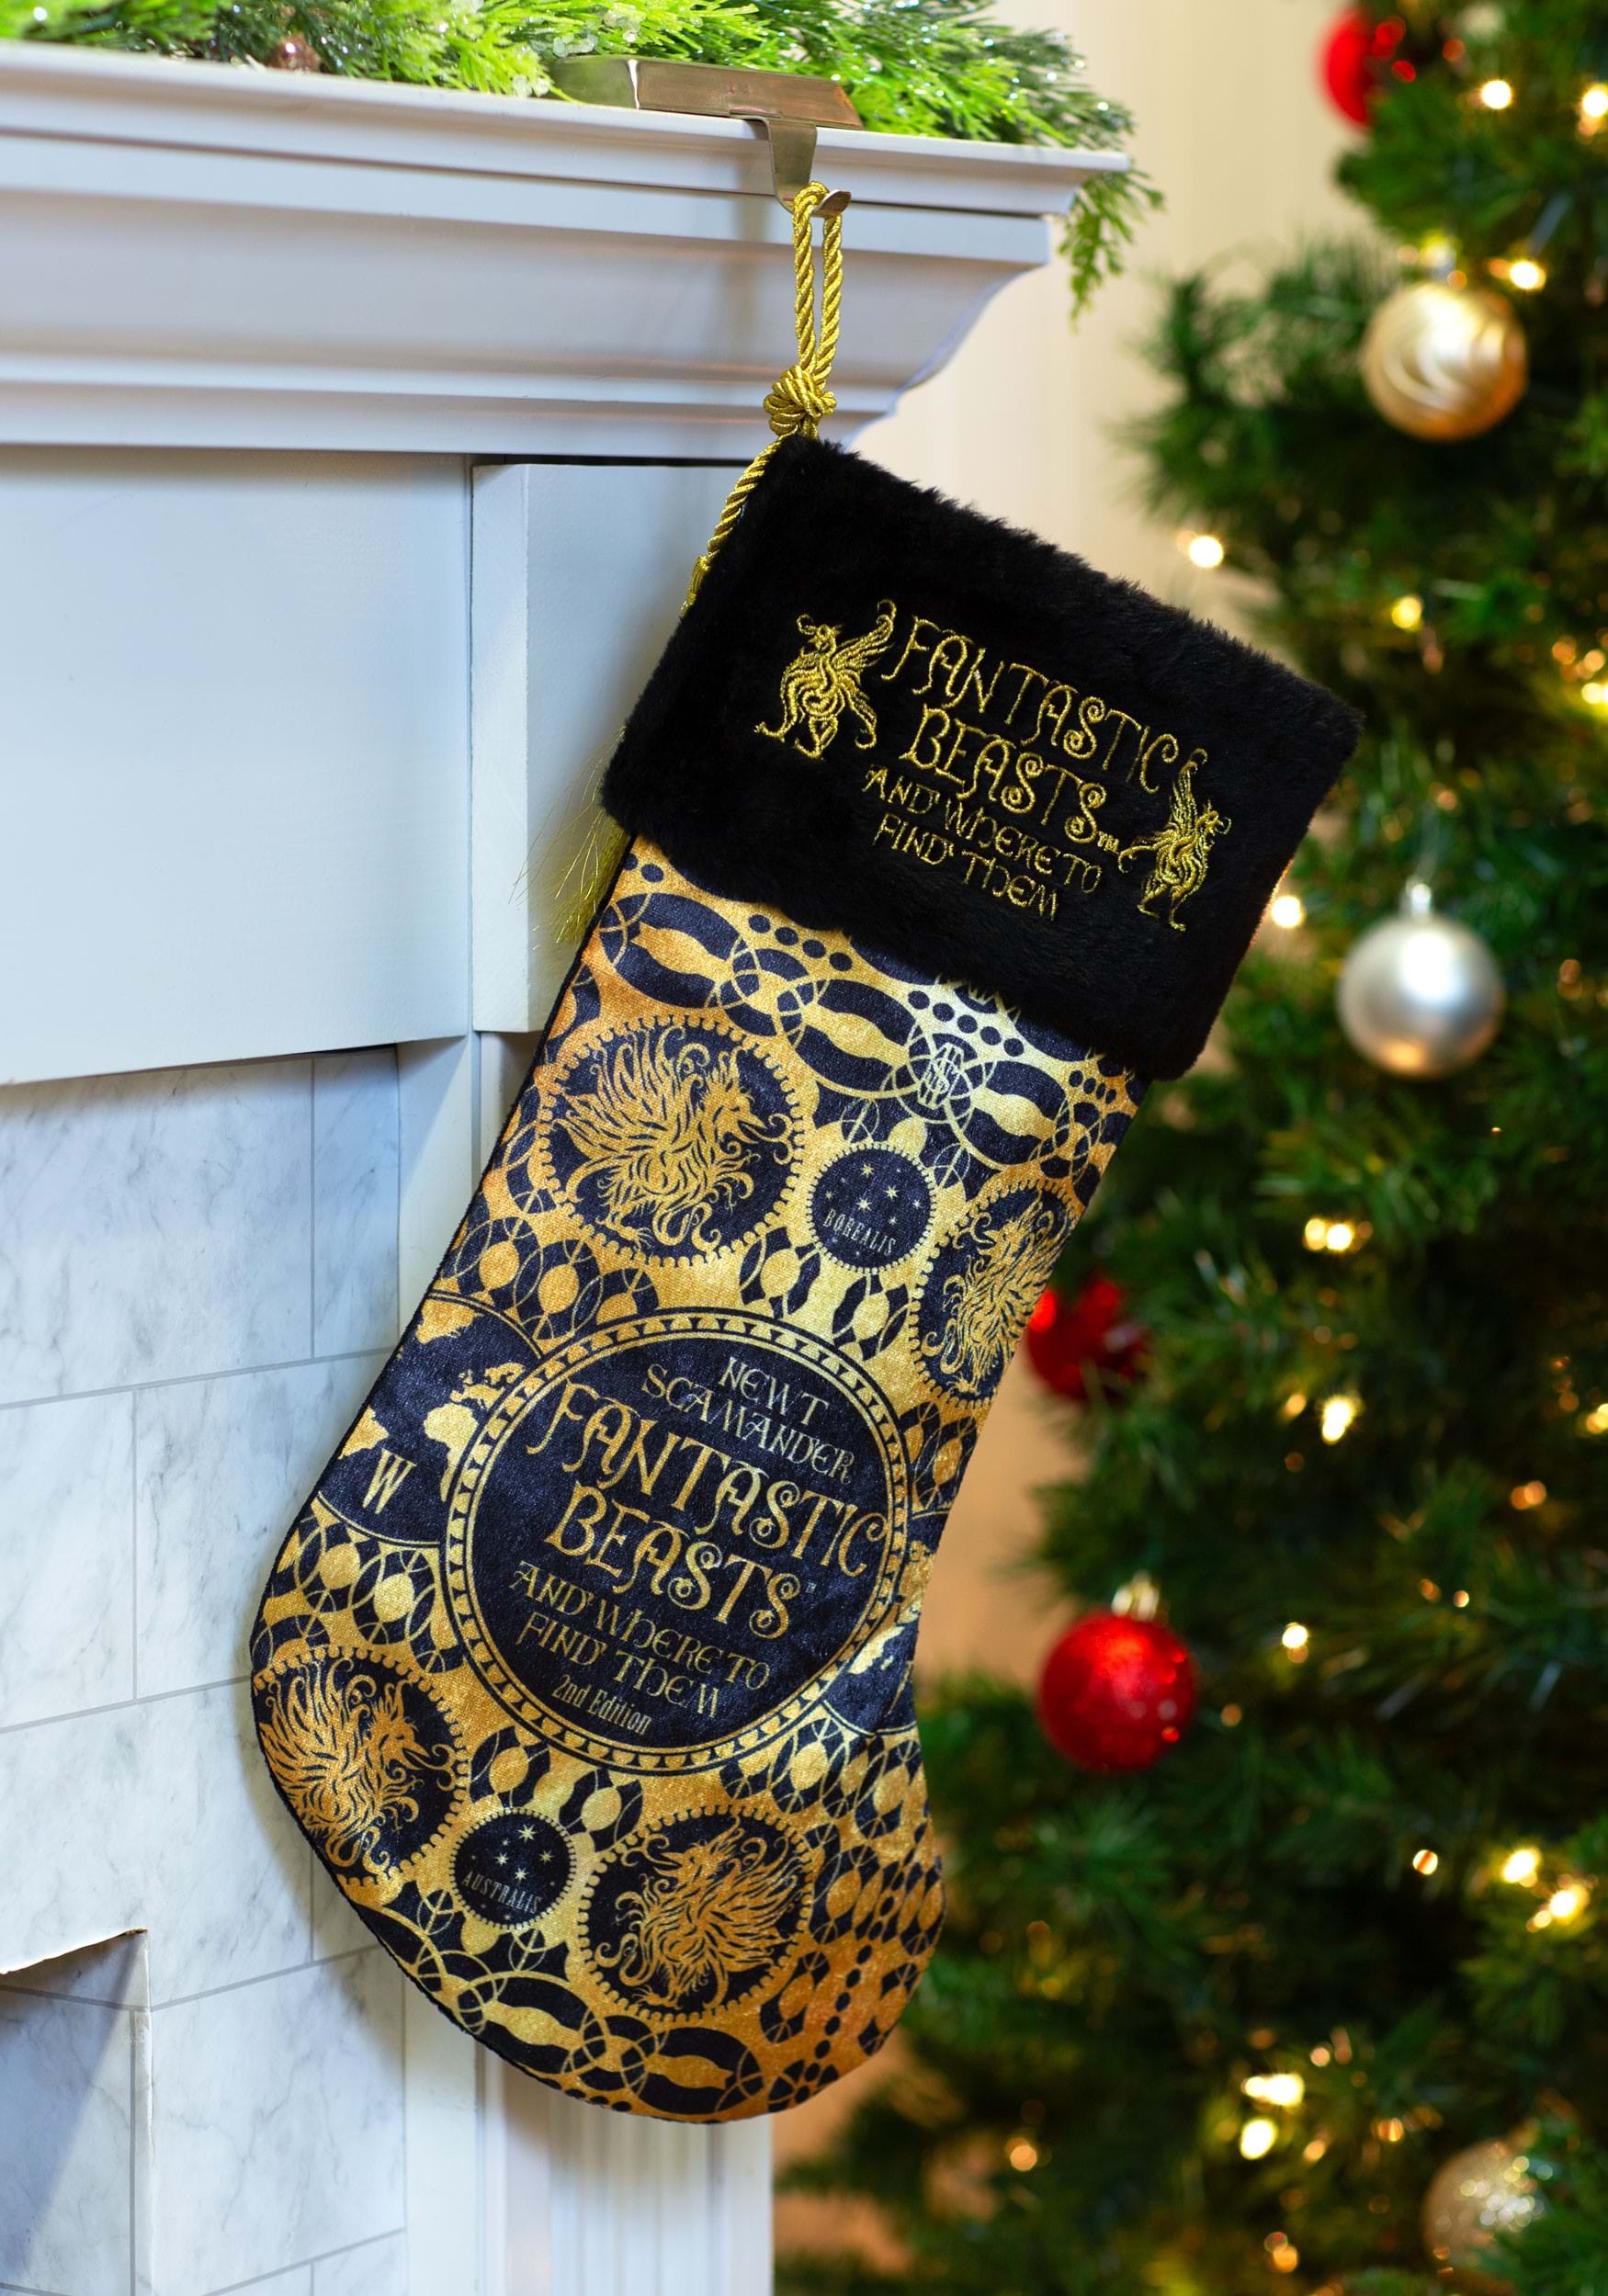 19" Fantastic Beasts and Where to Find Them Stocking